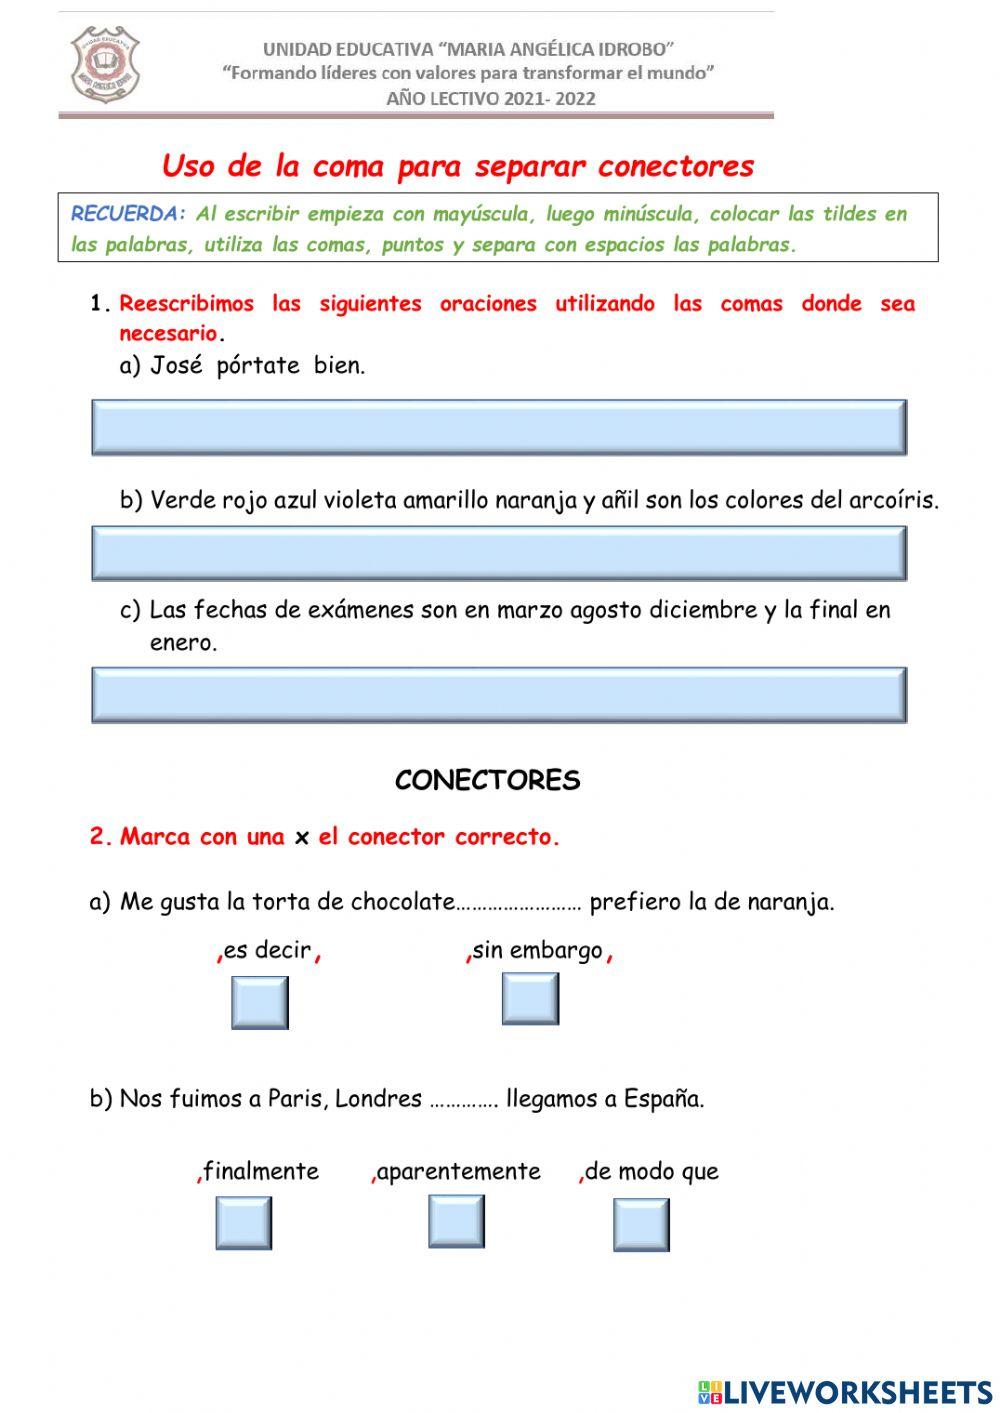 La coma online activity for 6to | Live Worksheets